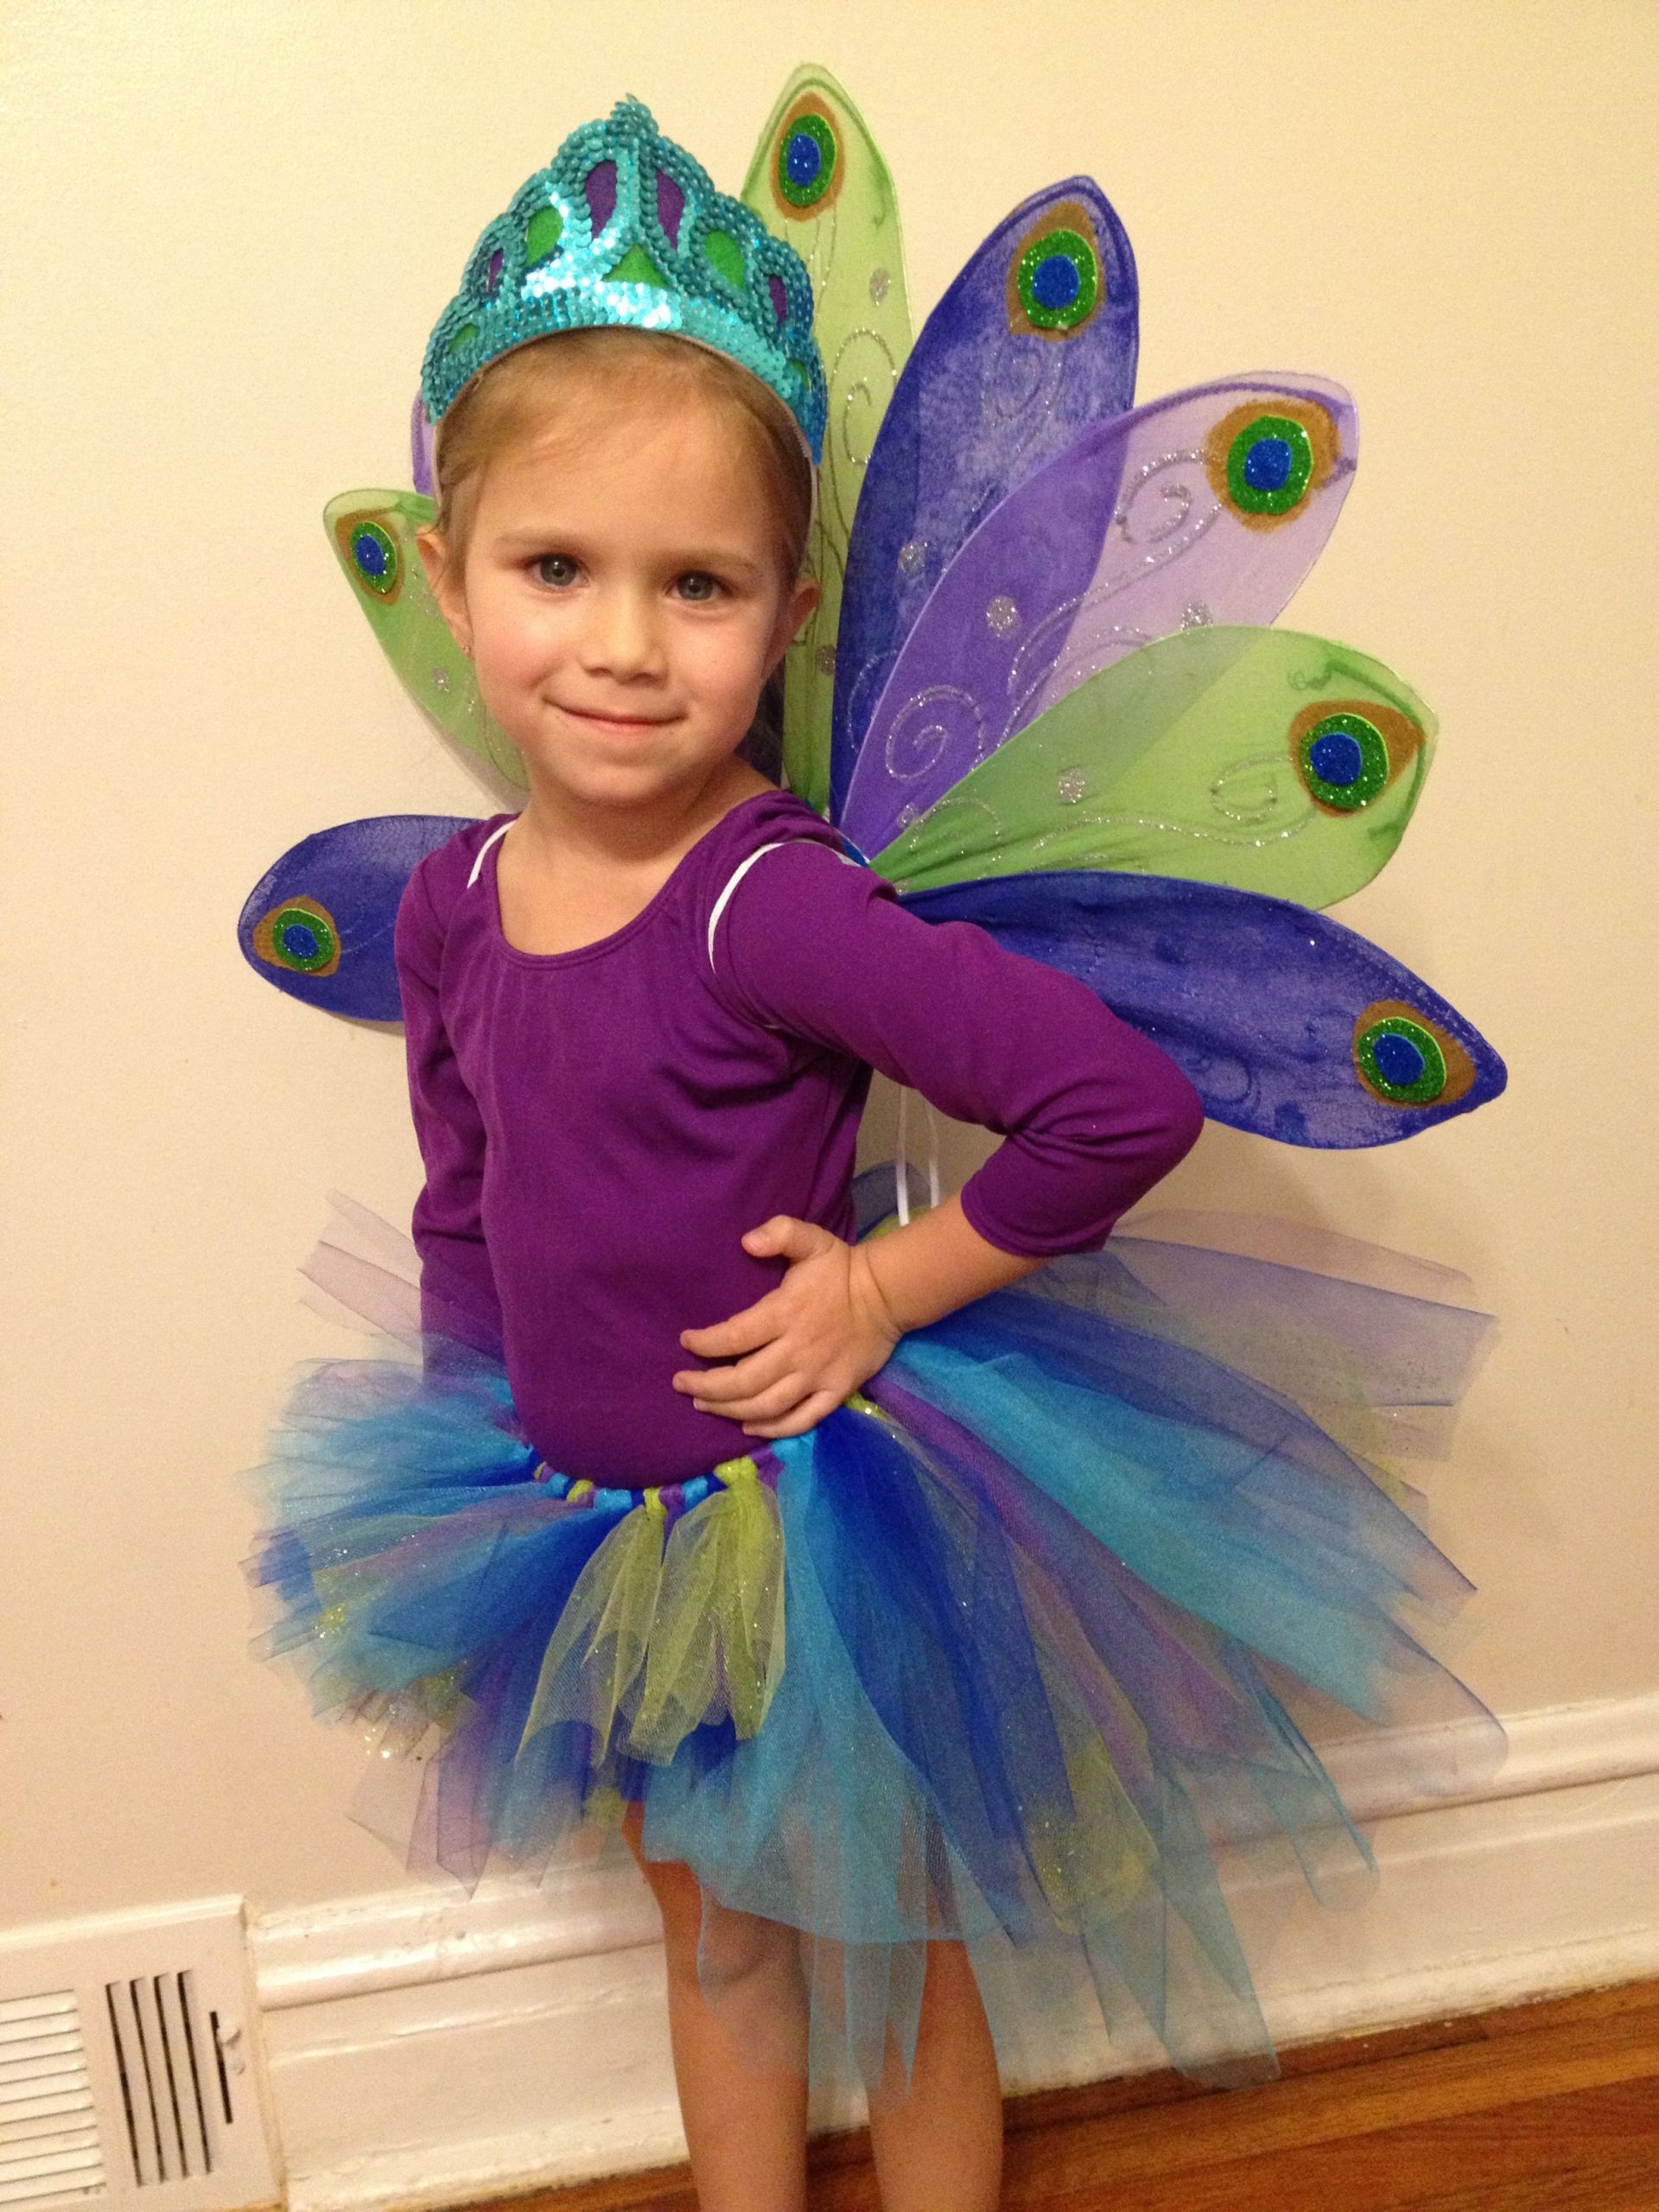 DIY Toddler Peacock Costume
 Peacock costume Thank you pinterest in 2019